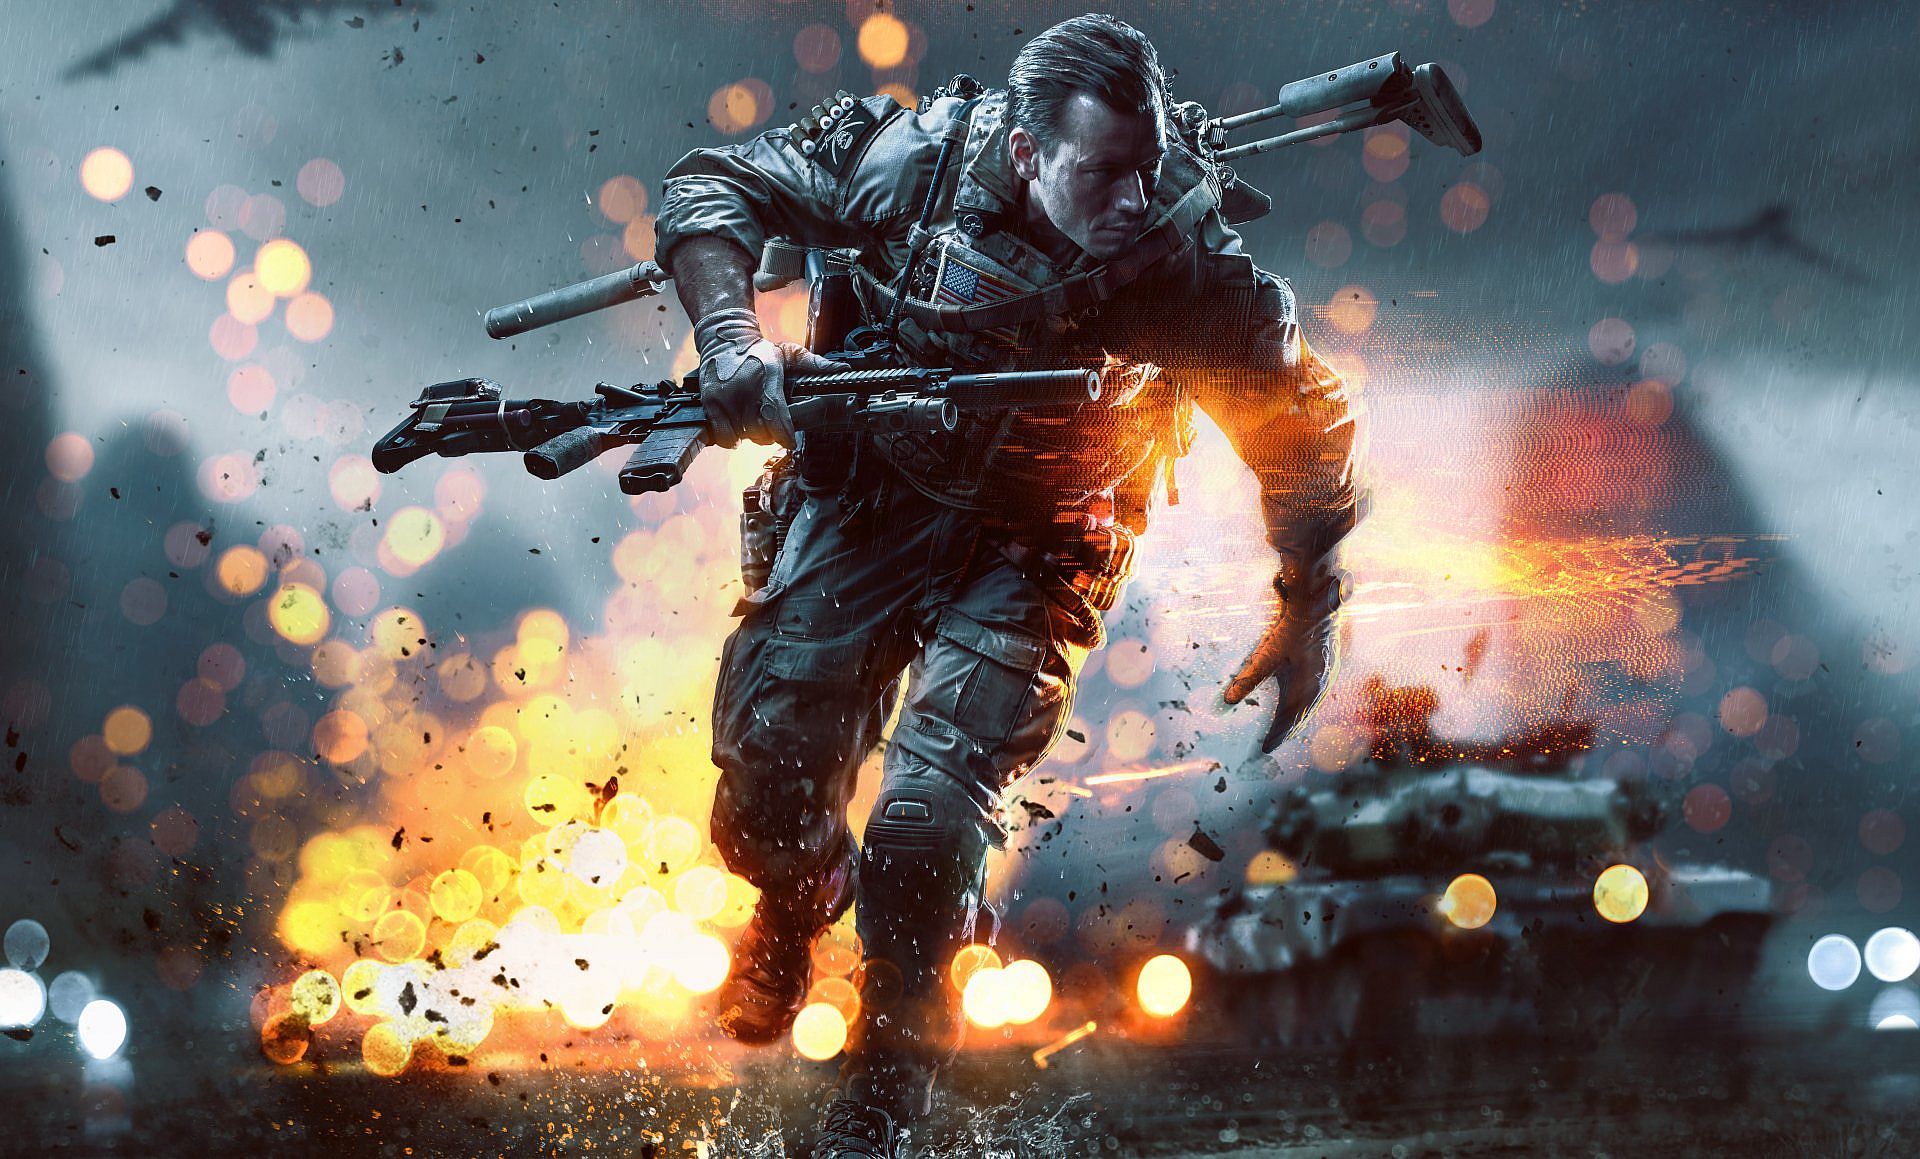 Image for Additional Battlefield games come to GeForce Now and RTX comes to 10 more games